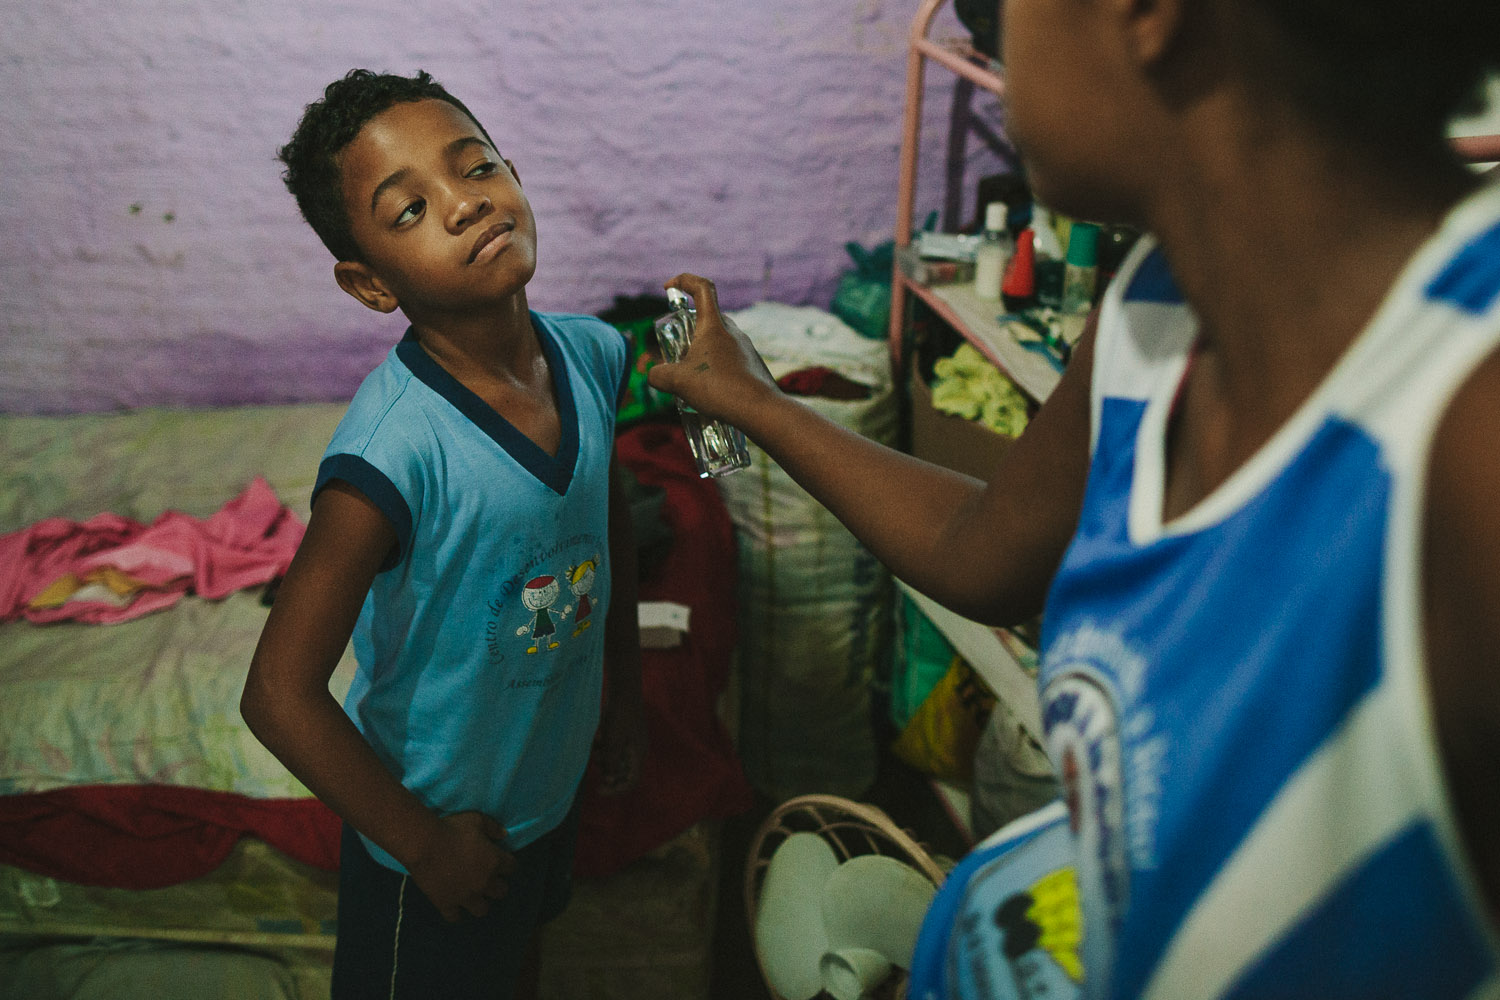   Even though Emidio lives in what we would consider poverty, he is still concerned with hygiene and being well presented. He puts on deoderant every day before school. Emidio's entire house (housing 4 people---soon to be 5) is perhaps no larger than